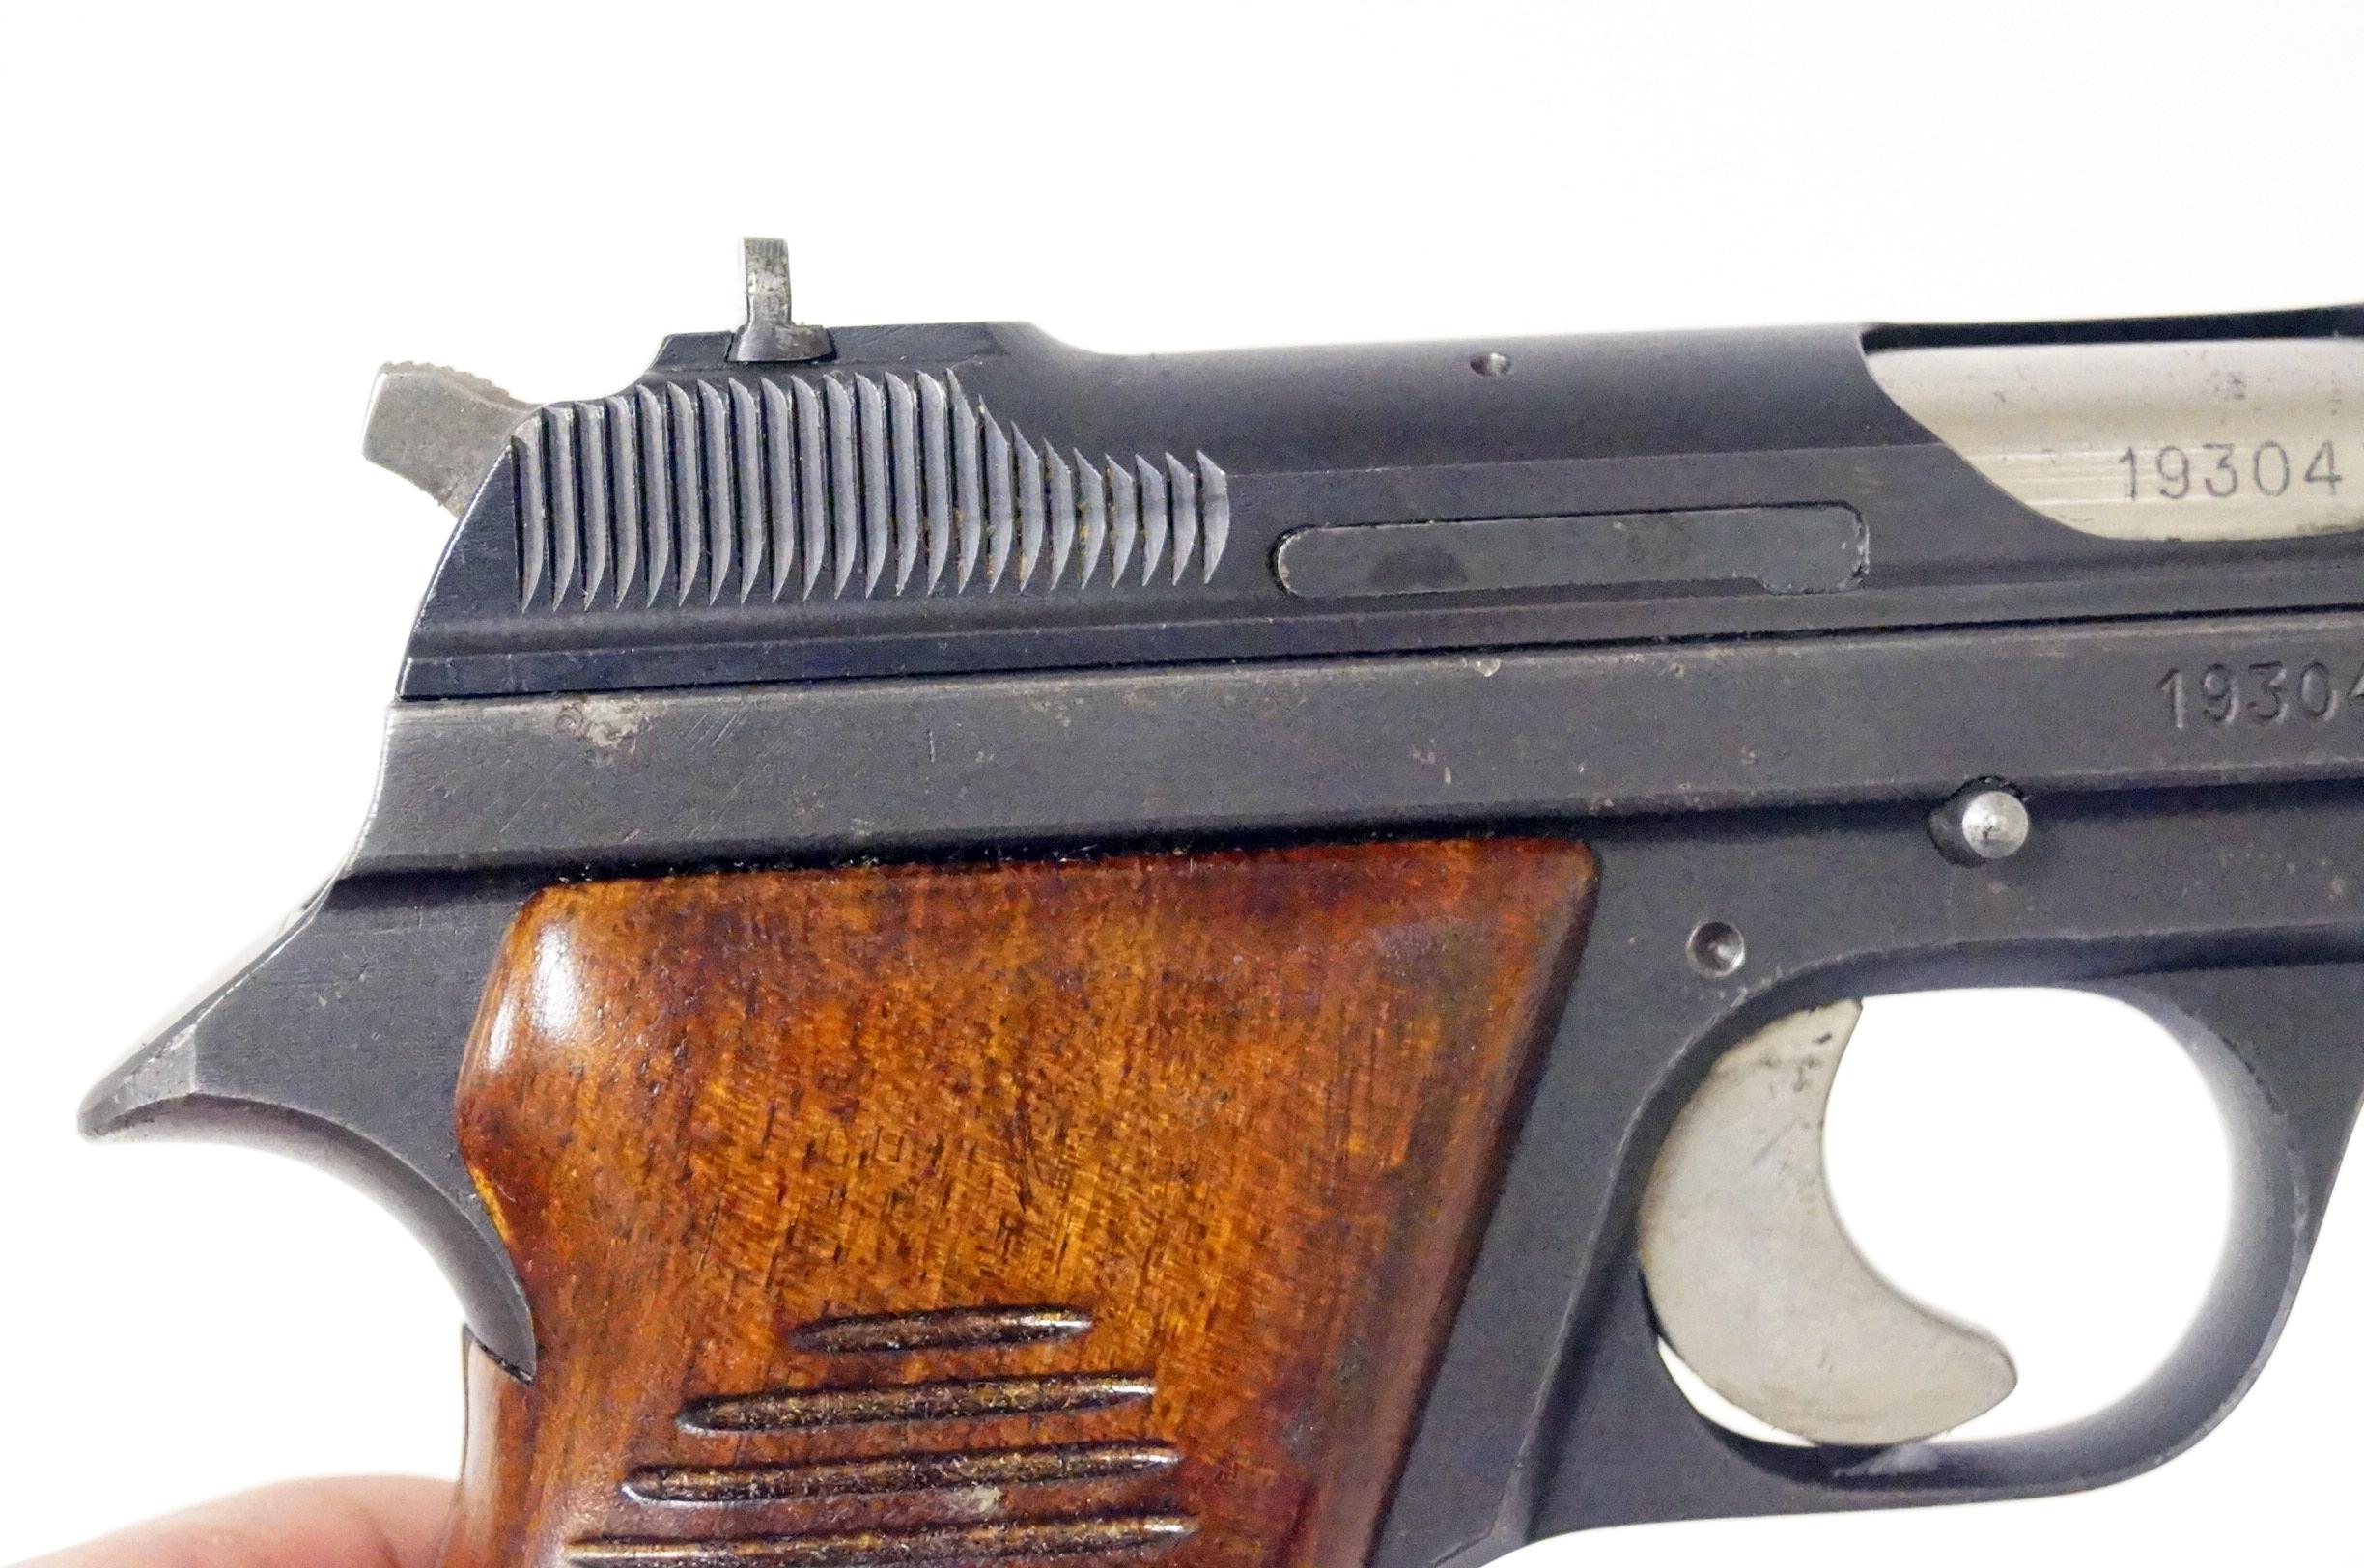 Rare Danish Contract SIG P210-DK M/49 9mm Semi-Automatic Pistol in Matching Factory Box